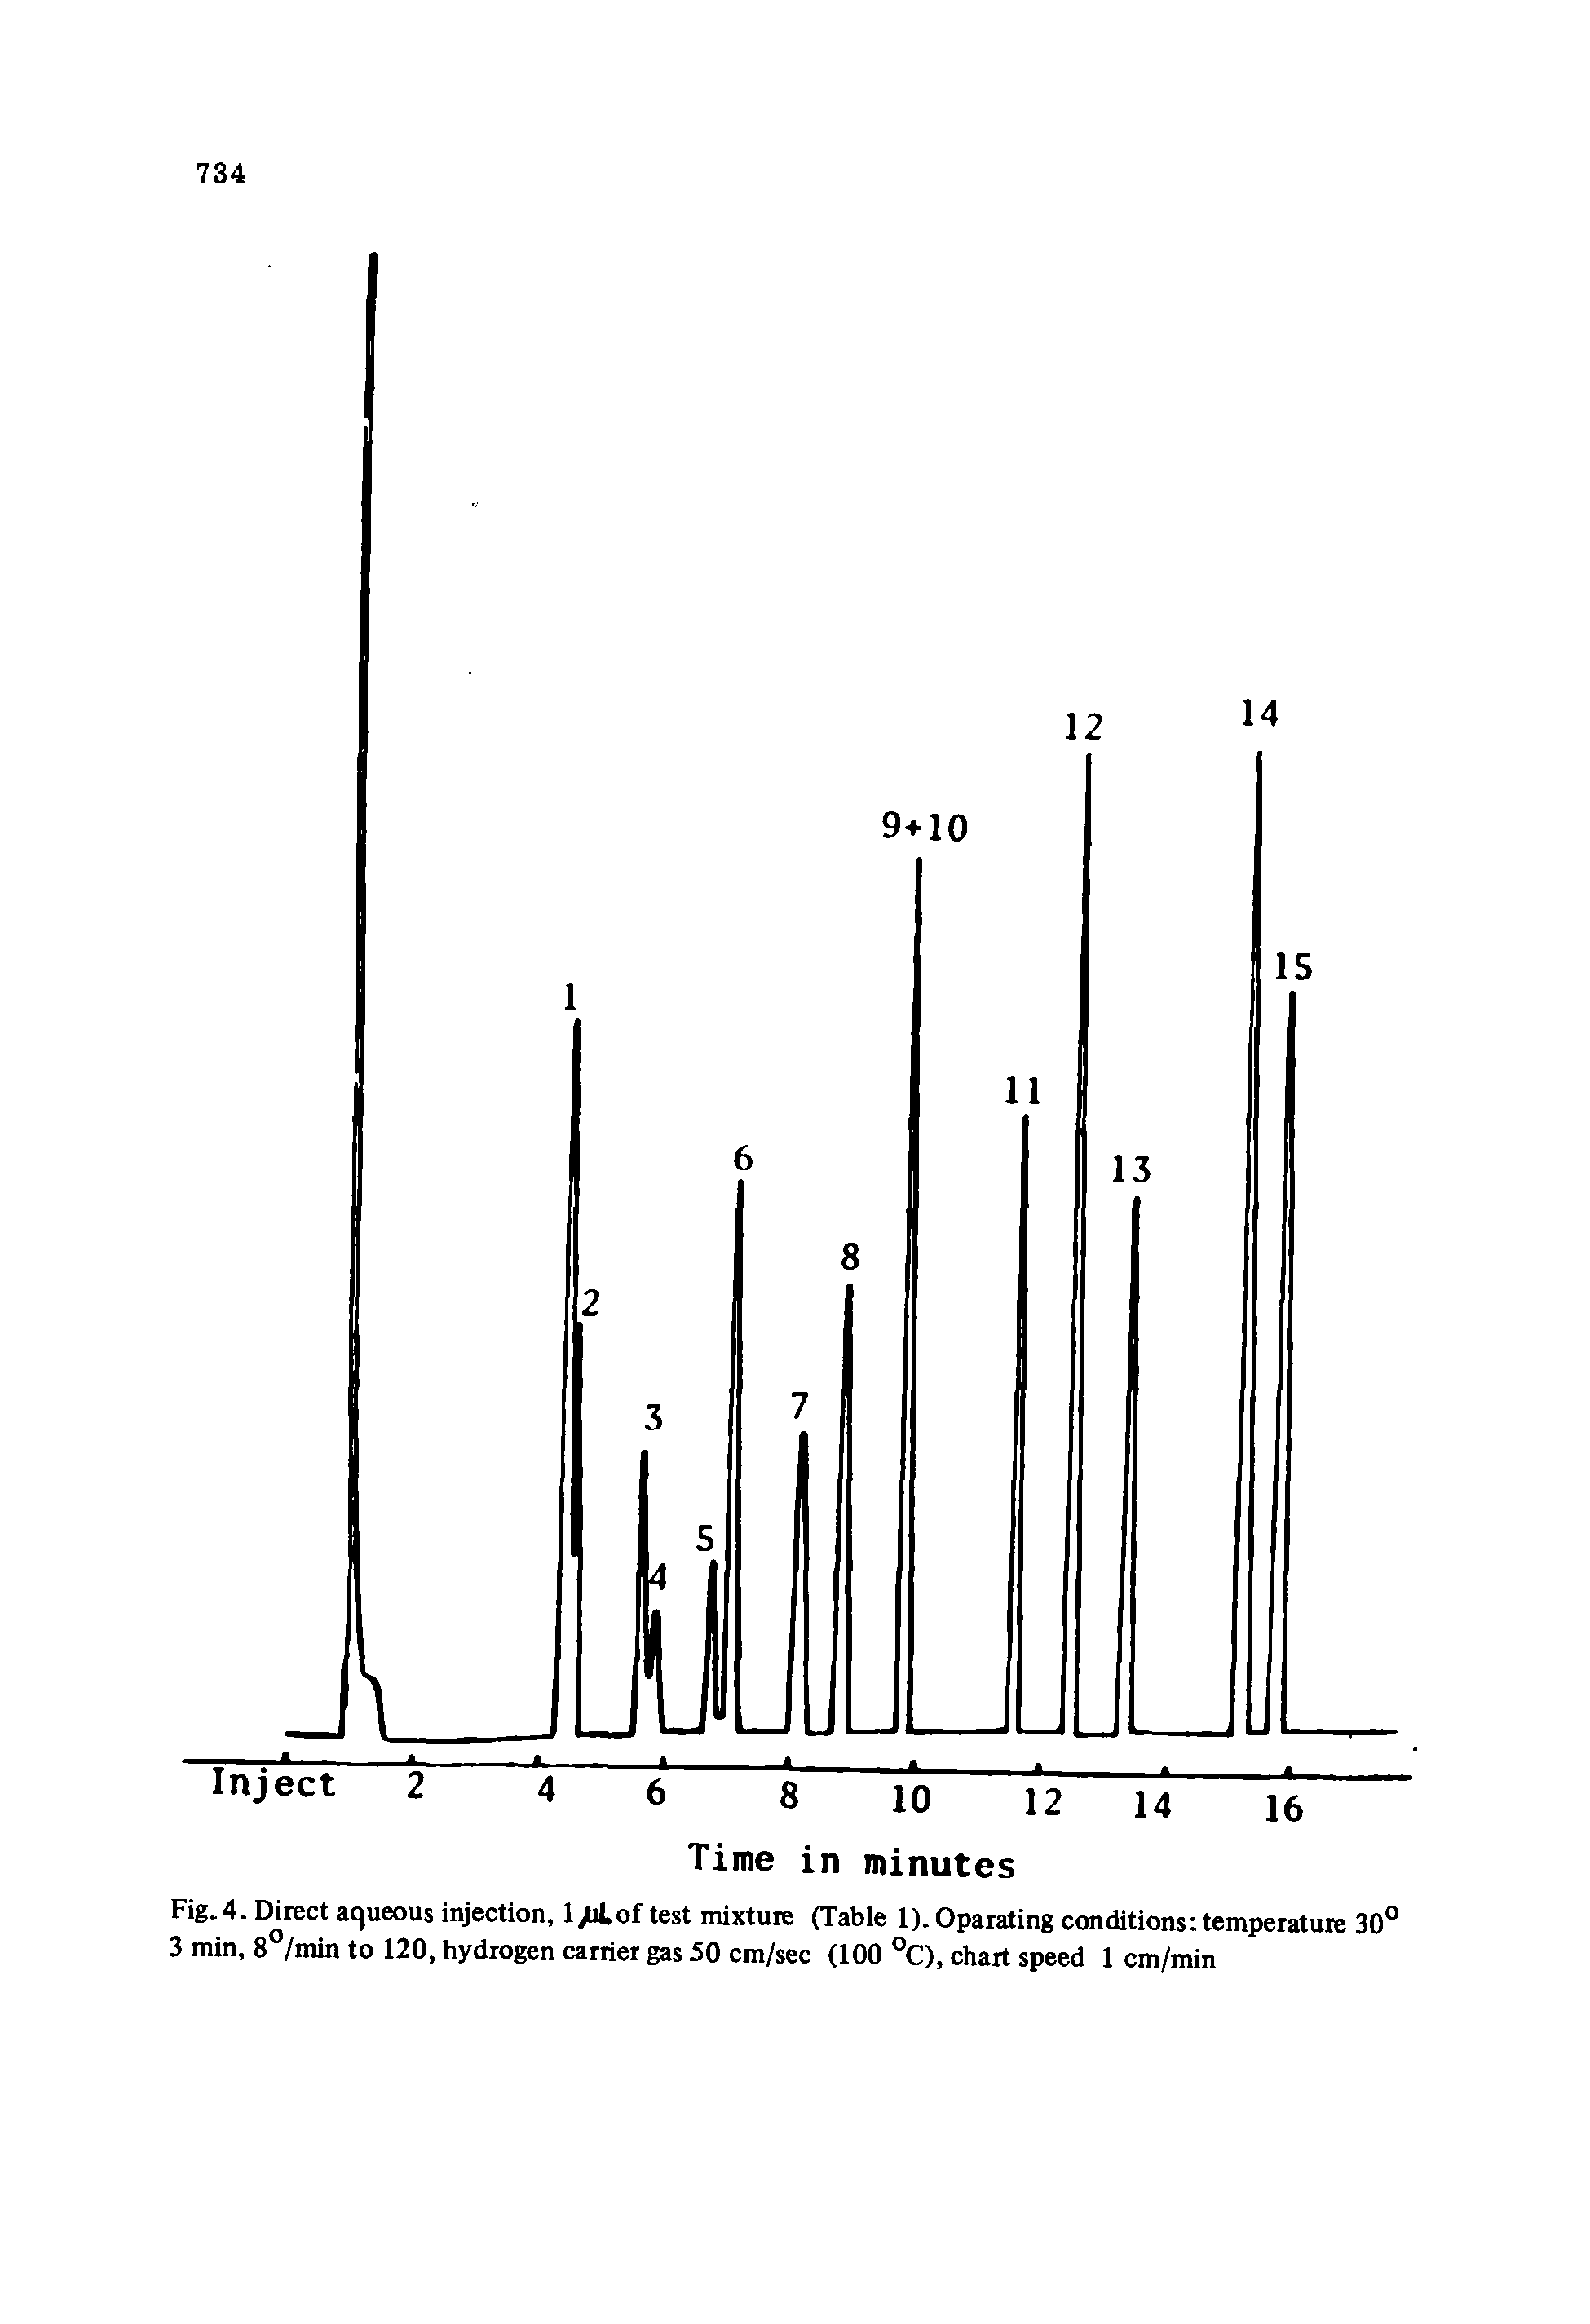 Fig.4. Direct aqueous injection, 1/itof test mixture (Table D.Oparating conditions temperature 30° 3 min, 8°/min to 120, hydrogen carrier gas 50 cm/sec (100 °C), chart speed 1 cm/min...